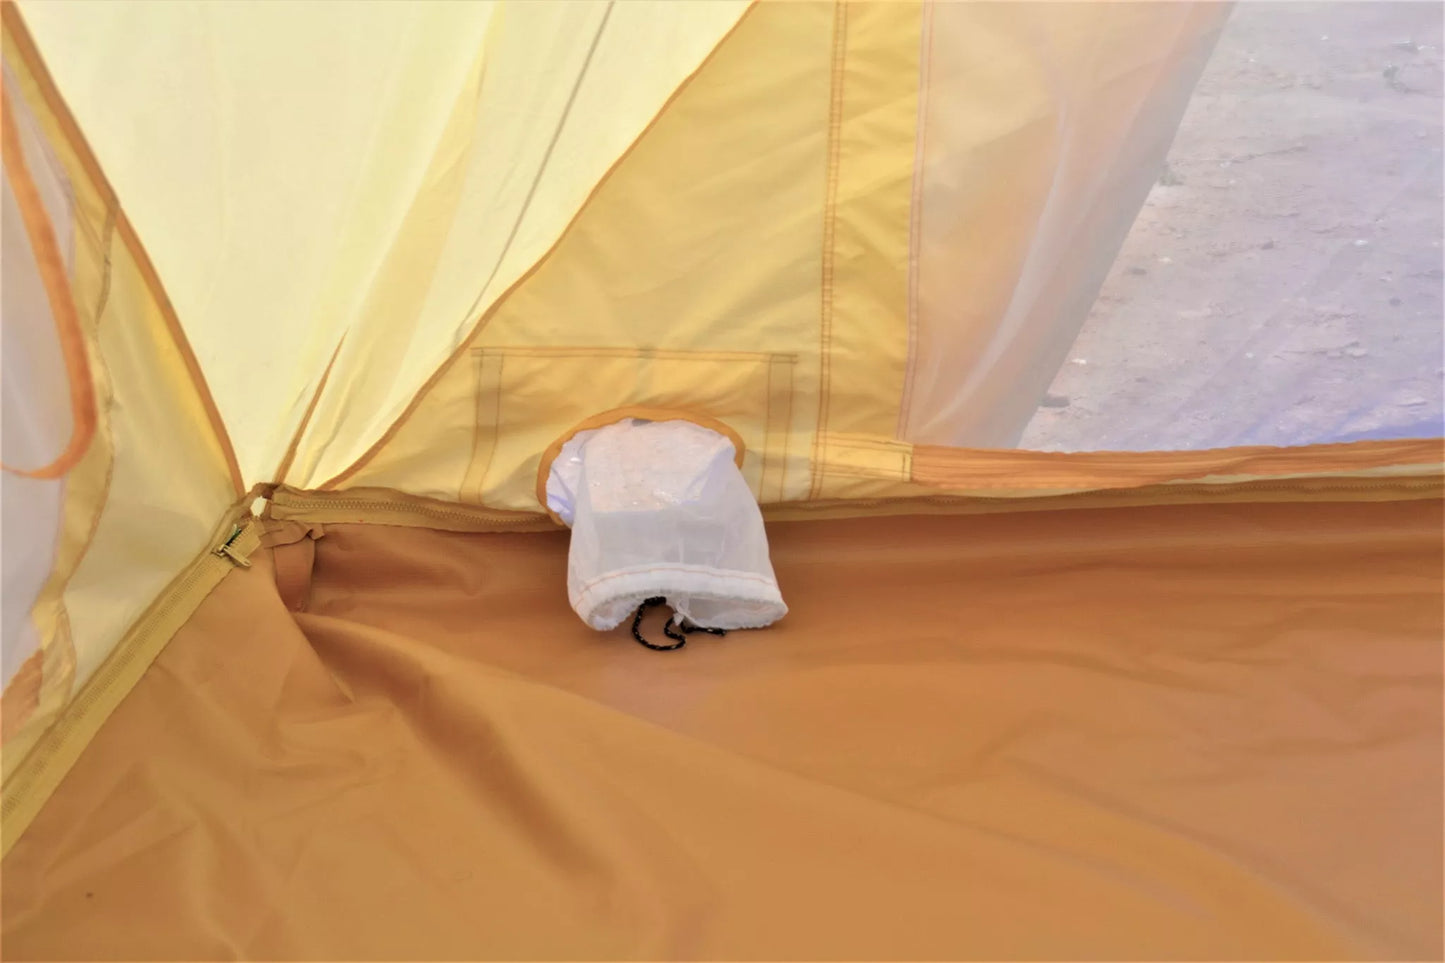 Embrace versatility with the Pyramid tent's duct inlet—perfect for threading extension cords or optimizing AC airflow